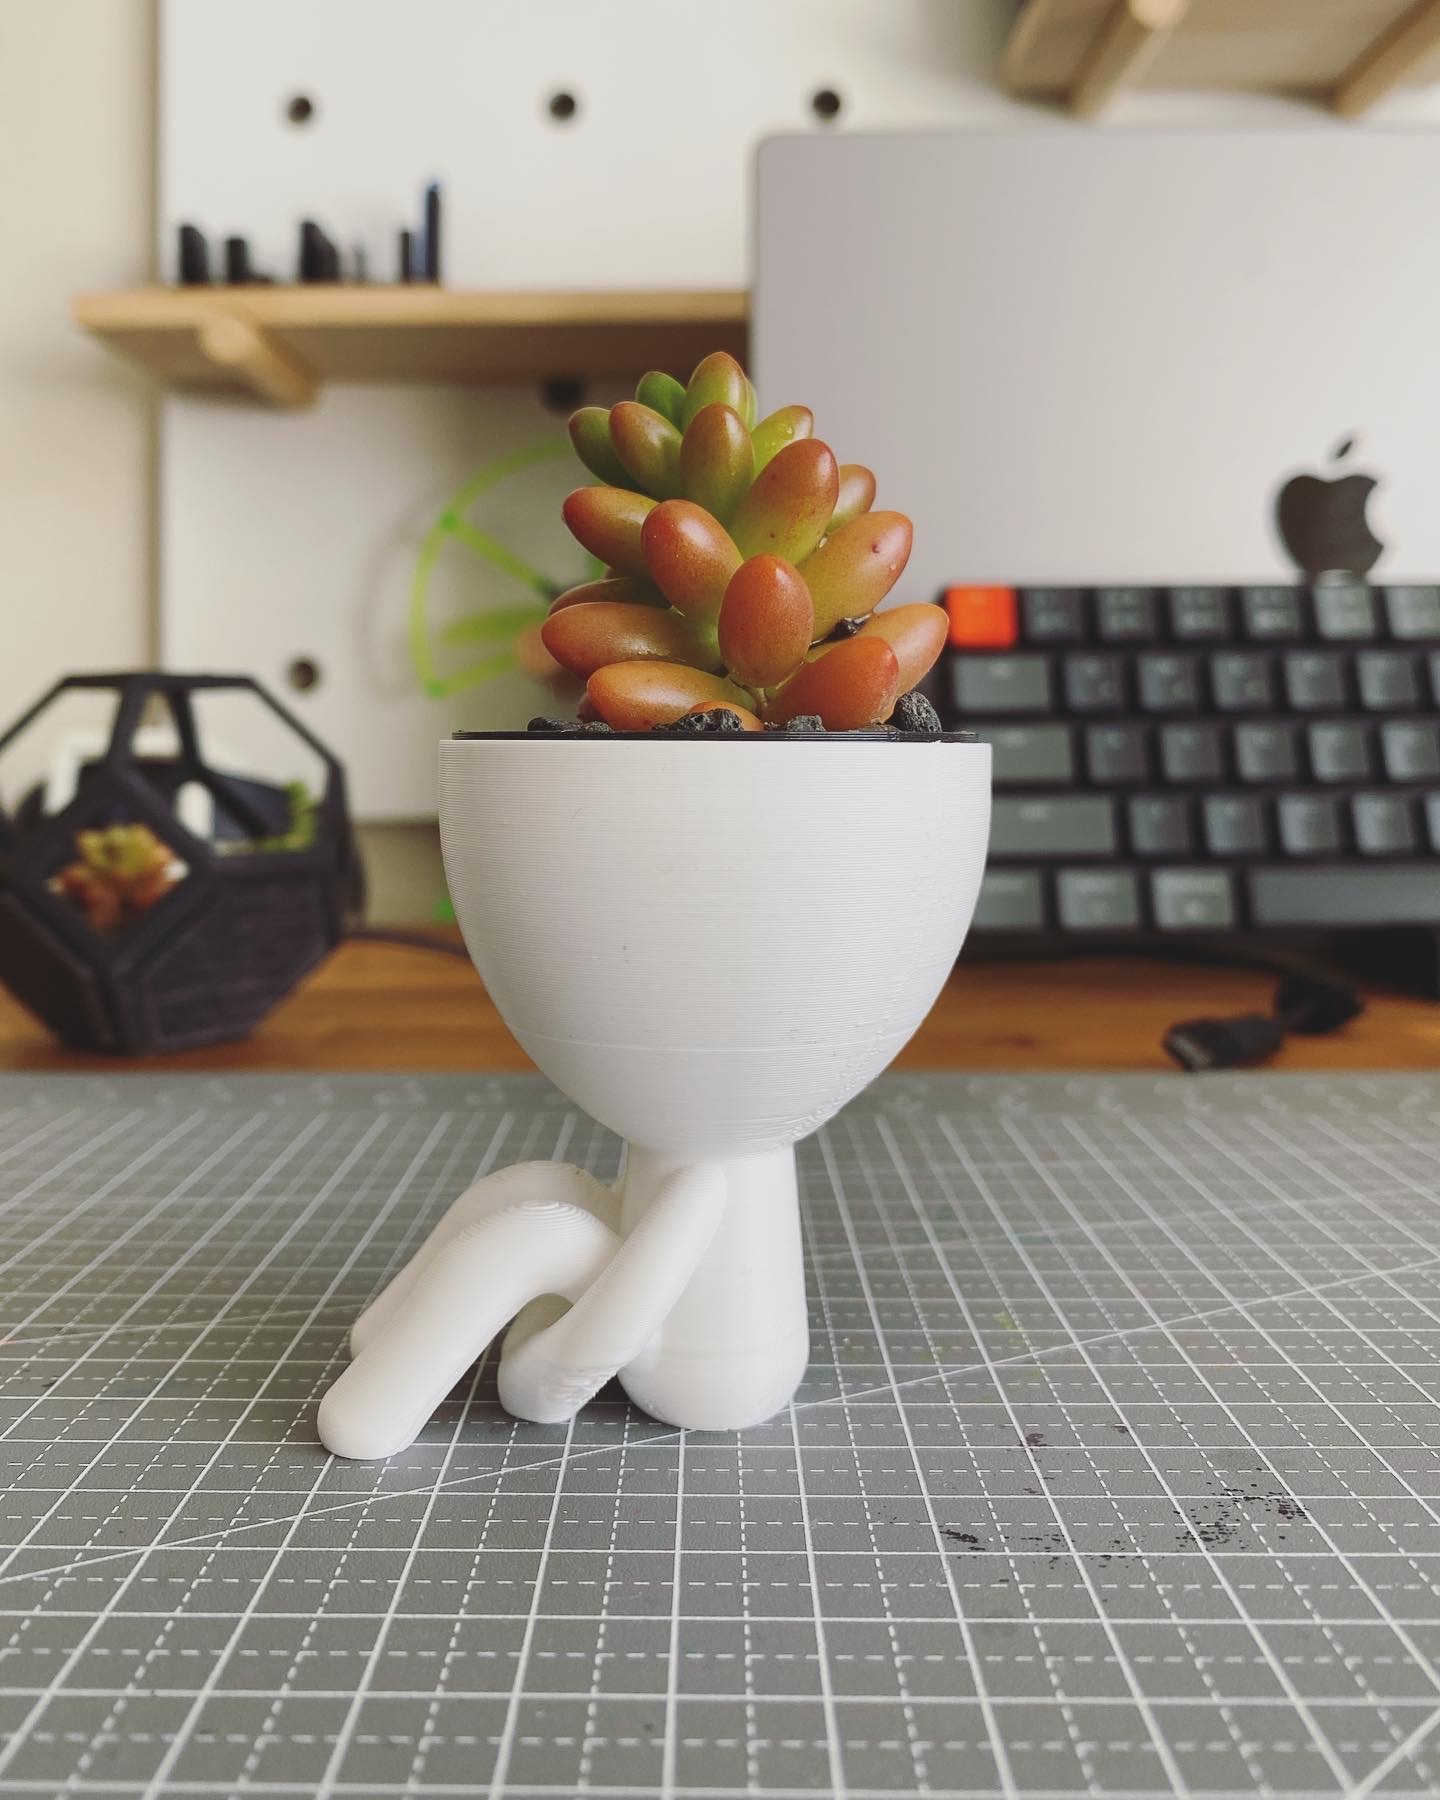 Add low maintenance succulent plants to my work from home desk setup